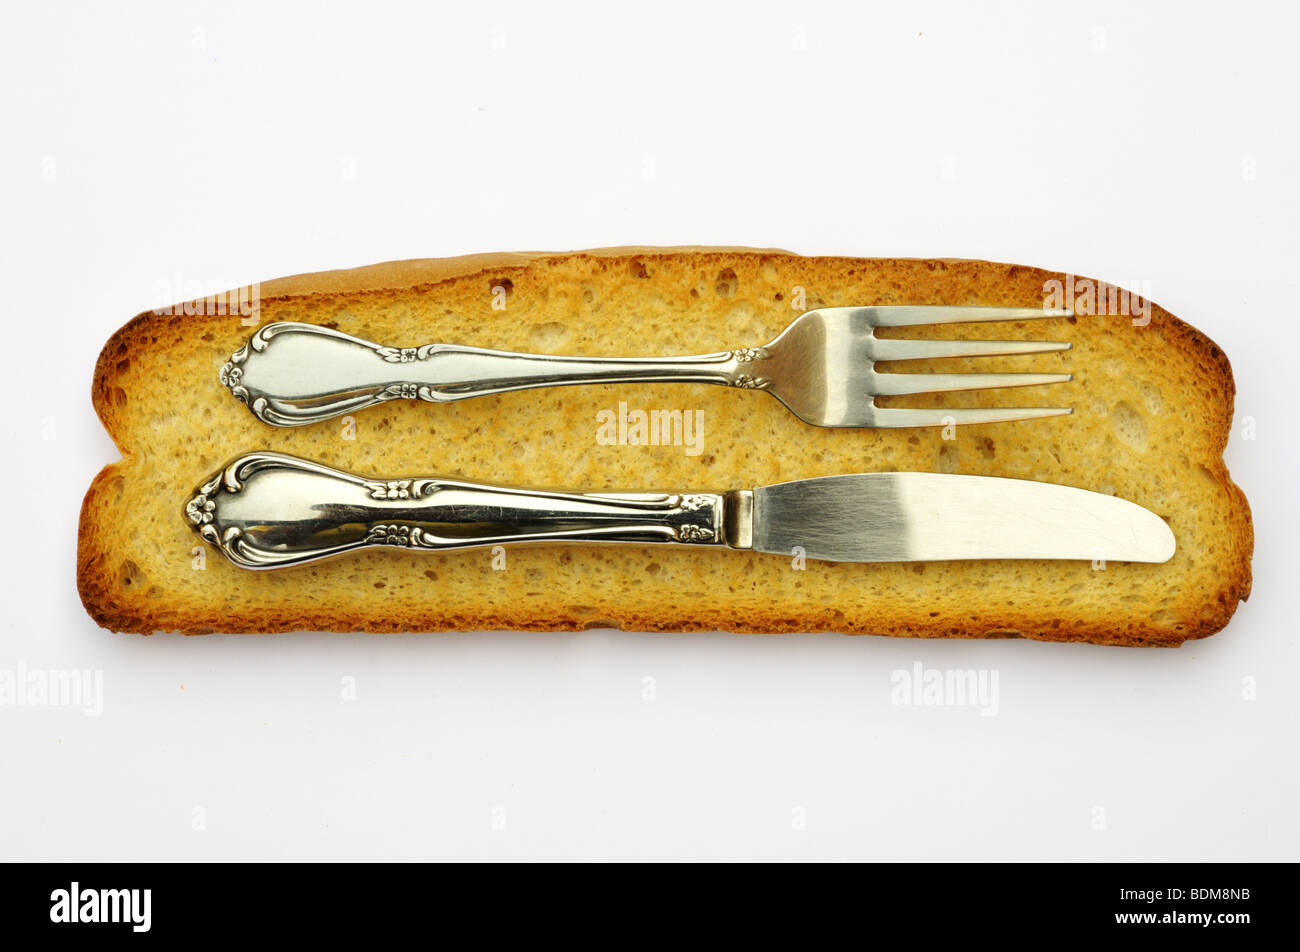 A pair of knife and folk on a slice of dried grilled bread. Stock Photo